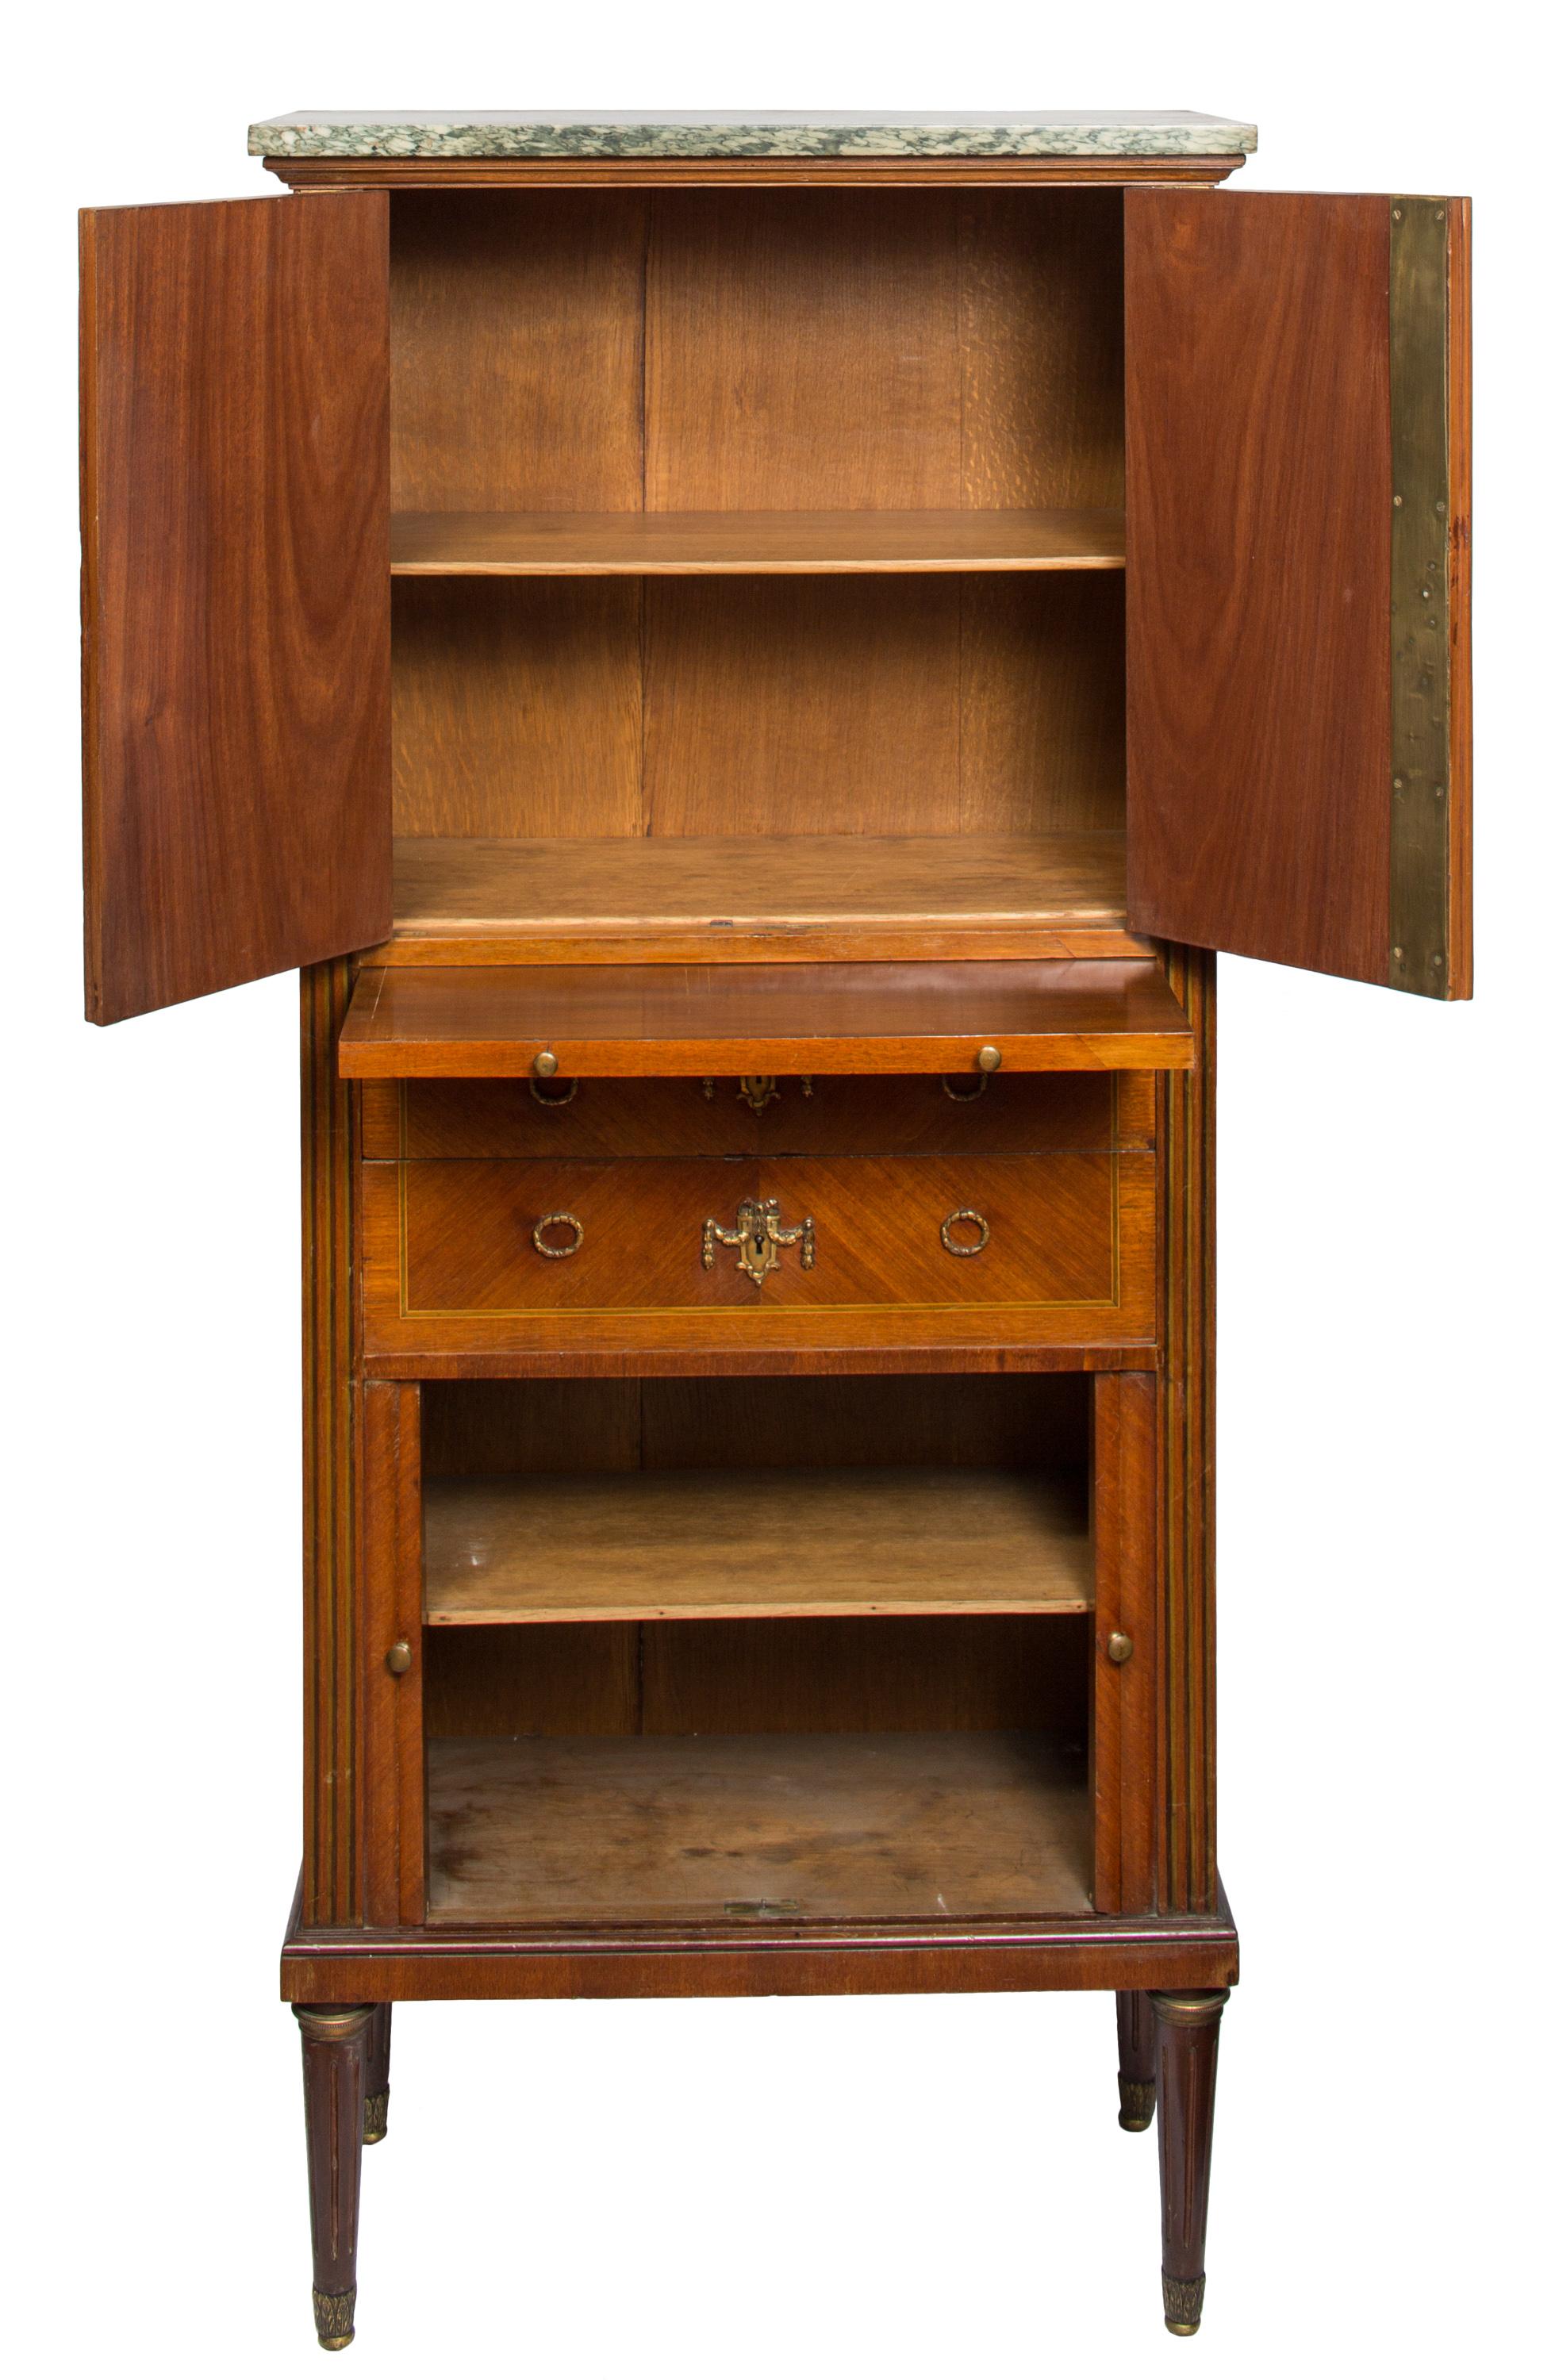 Louis XVI 19th Century French Standing Secrétaire / Dry Bar with Tambour Doors, Marble Top For Sale